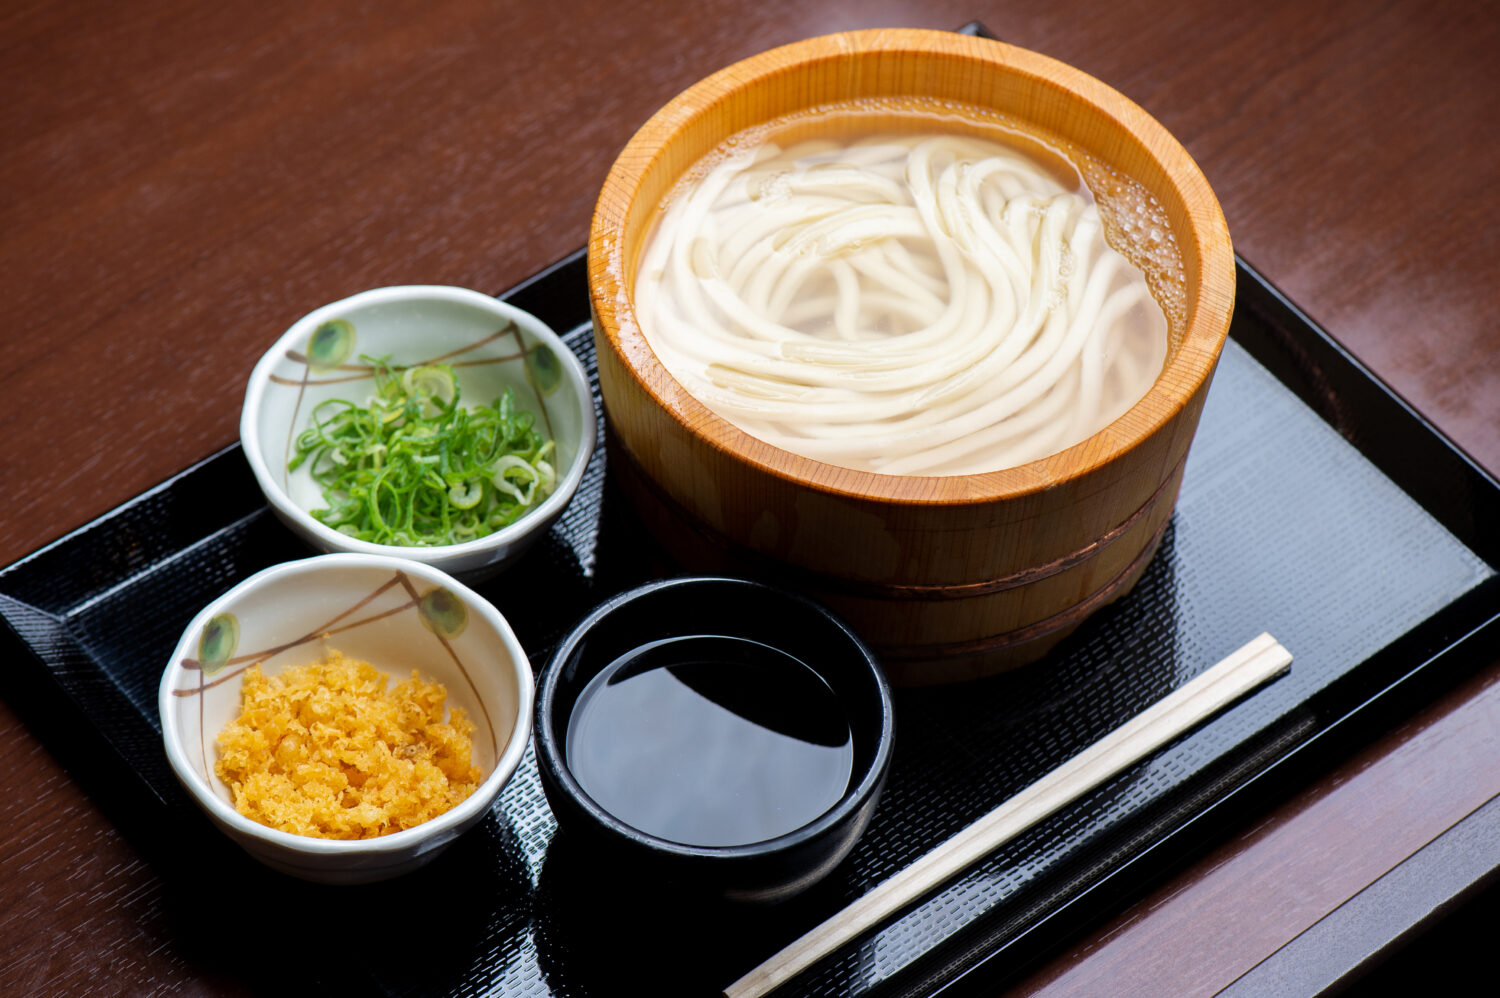 How to eat kama-age udon | Limitless arrangements of condiments and toppings!